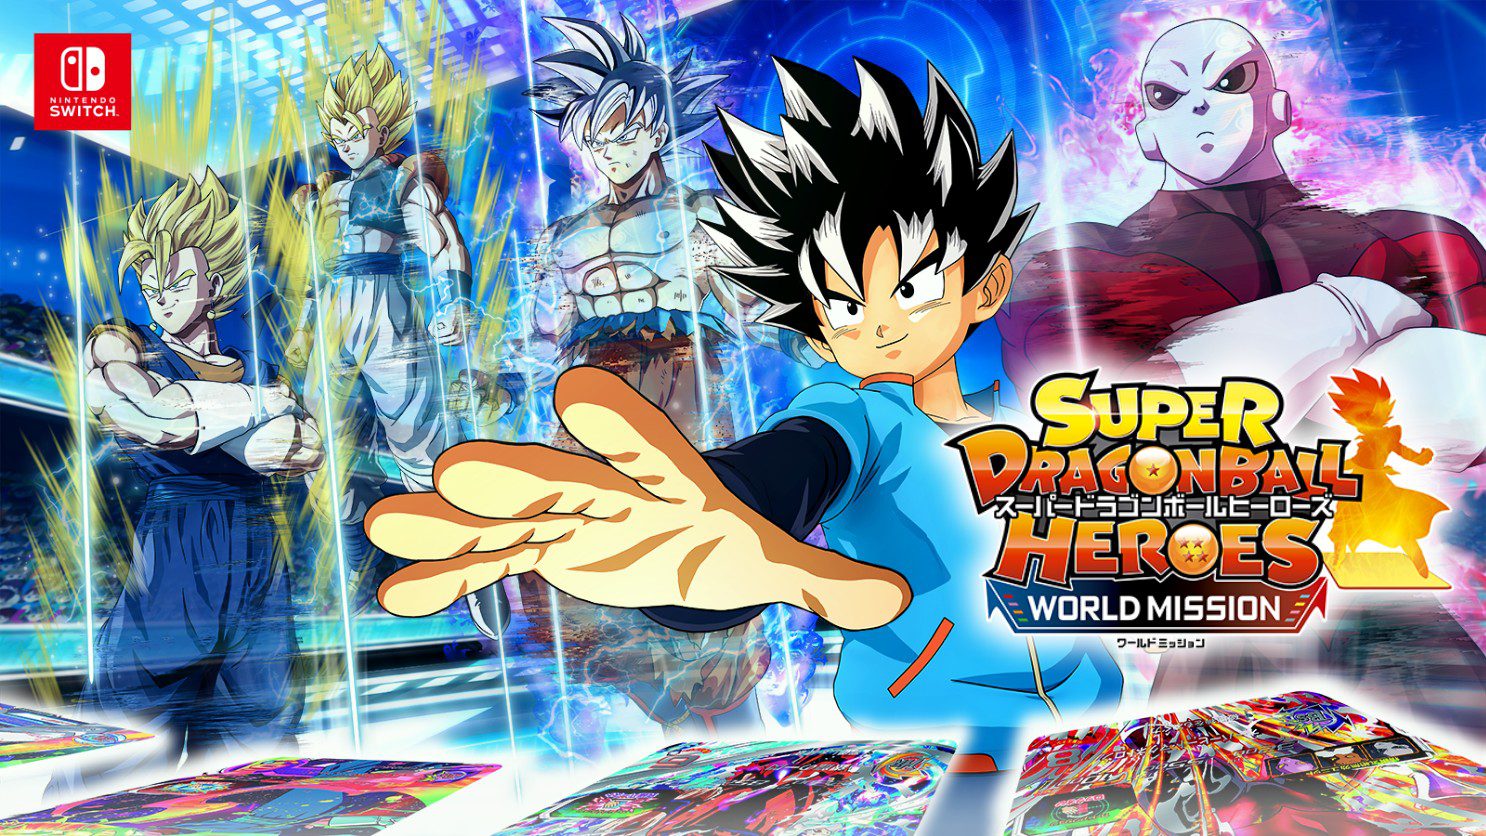 Switch exclusive Super Dragon Ball Heroes World Mission getting Hero edition